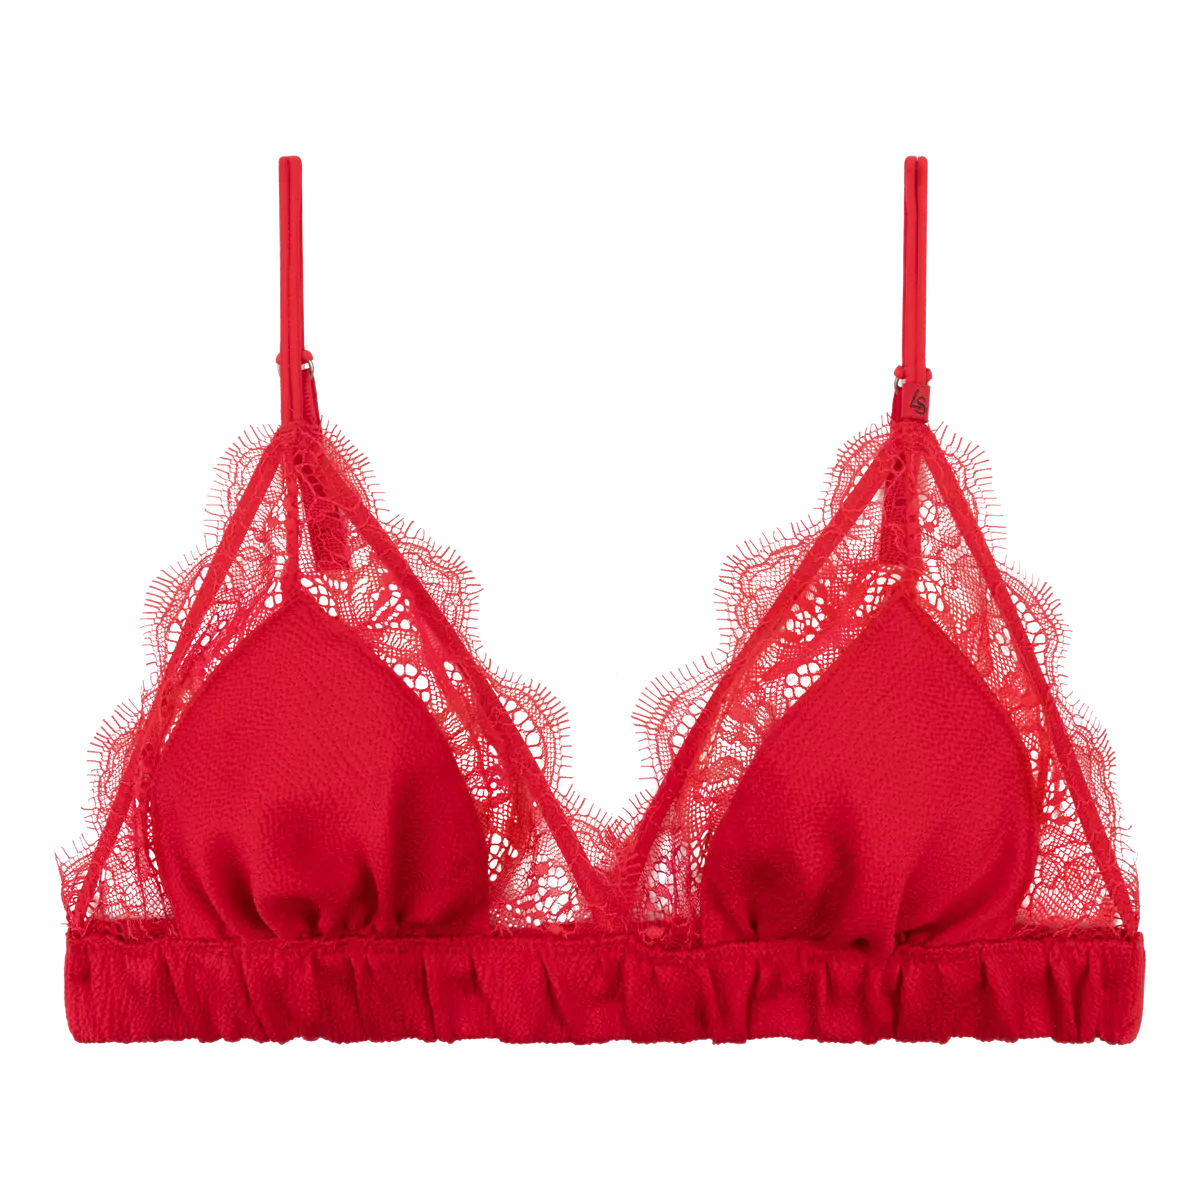 Love Stories Love Lace Bralette - red